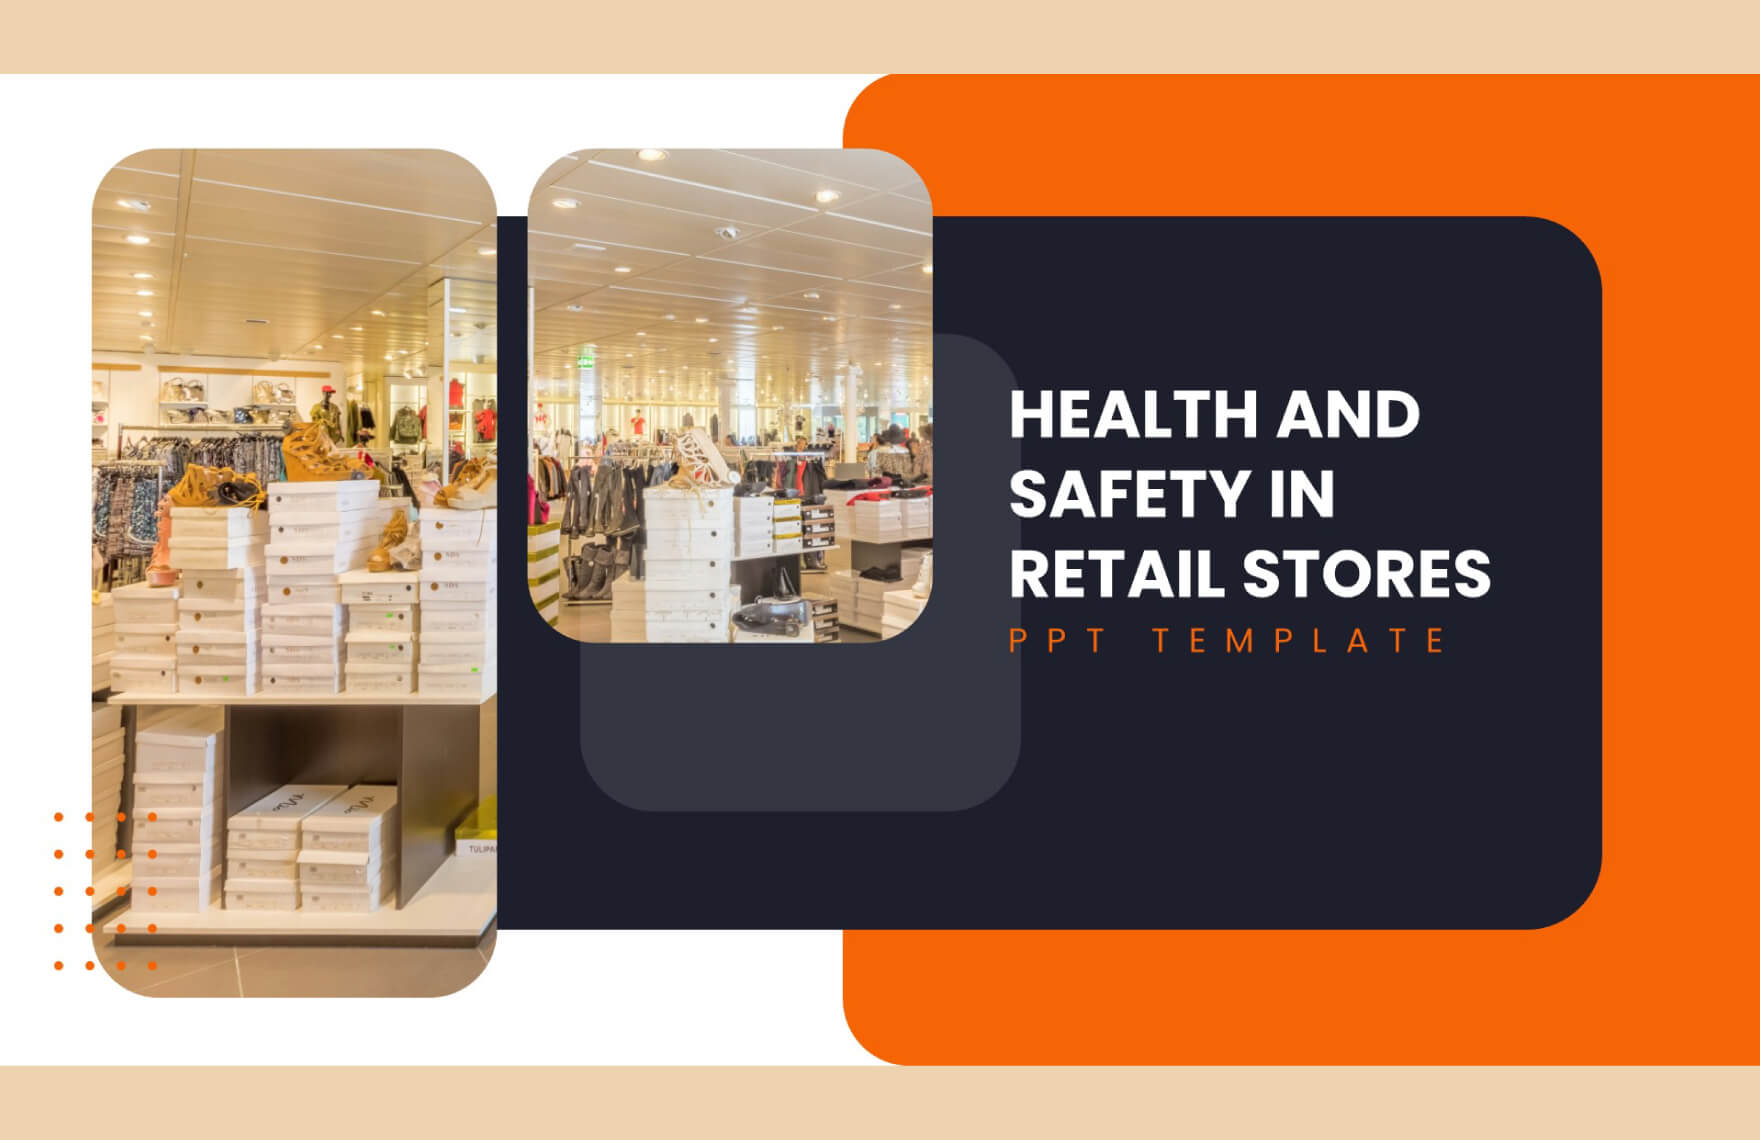 Health and Safety in Retail Stores PPT Template